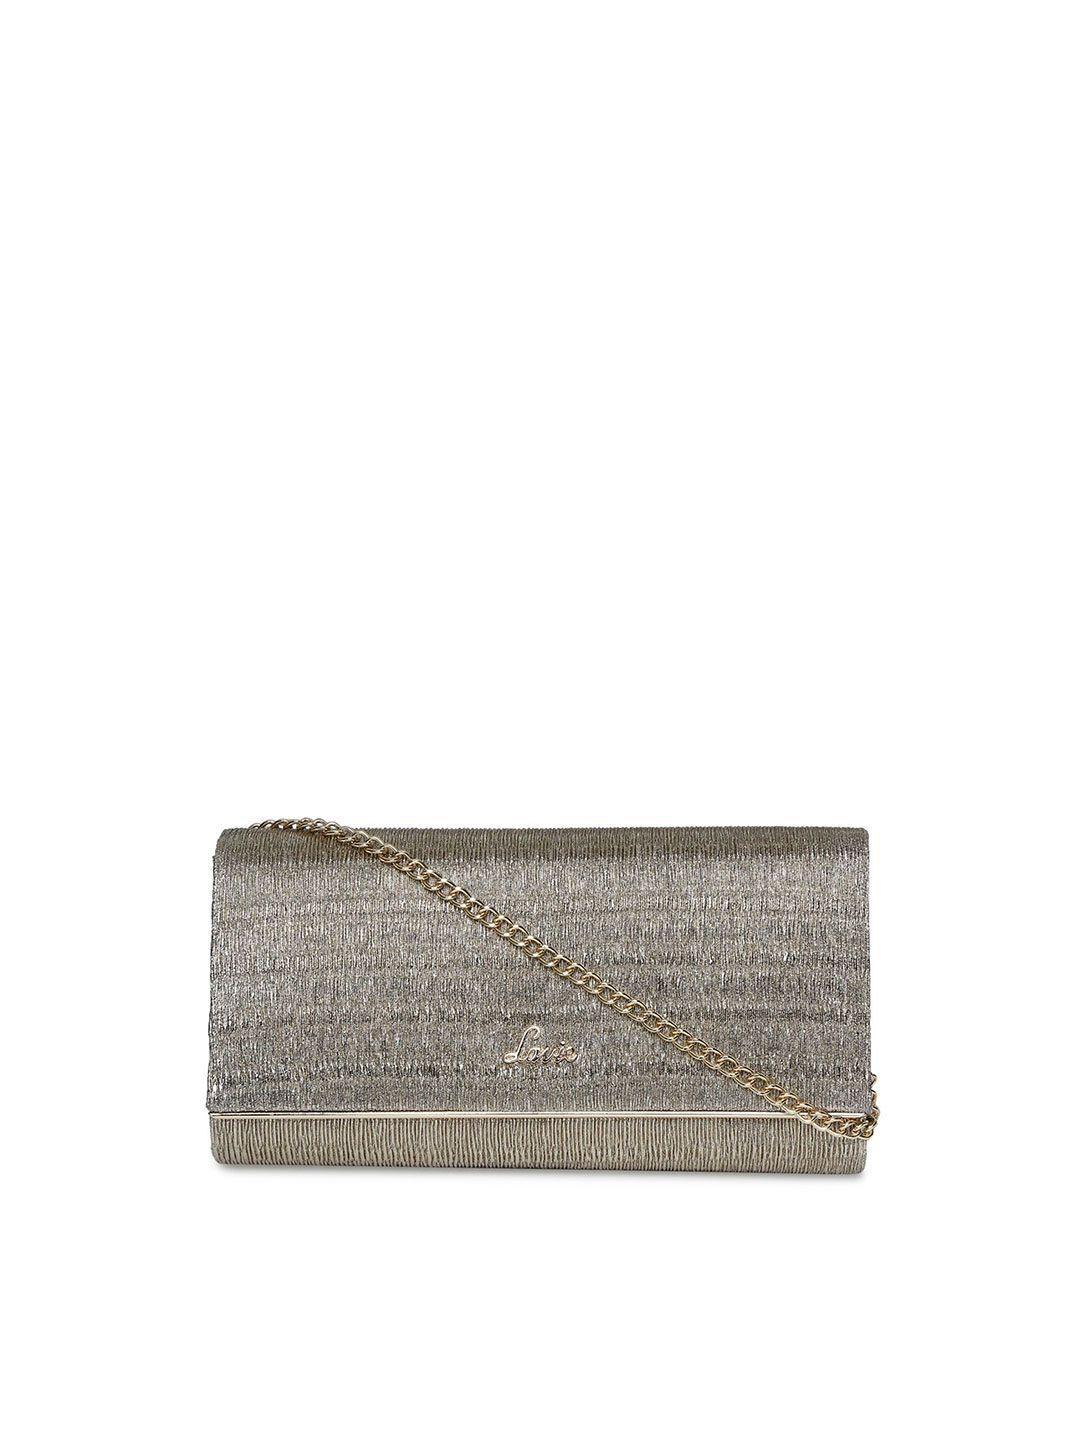 lavie women bronze textured fold over clutch with chain sling strap